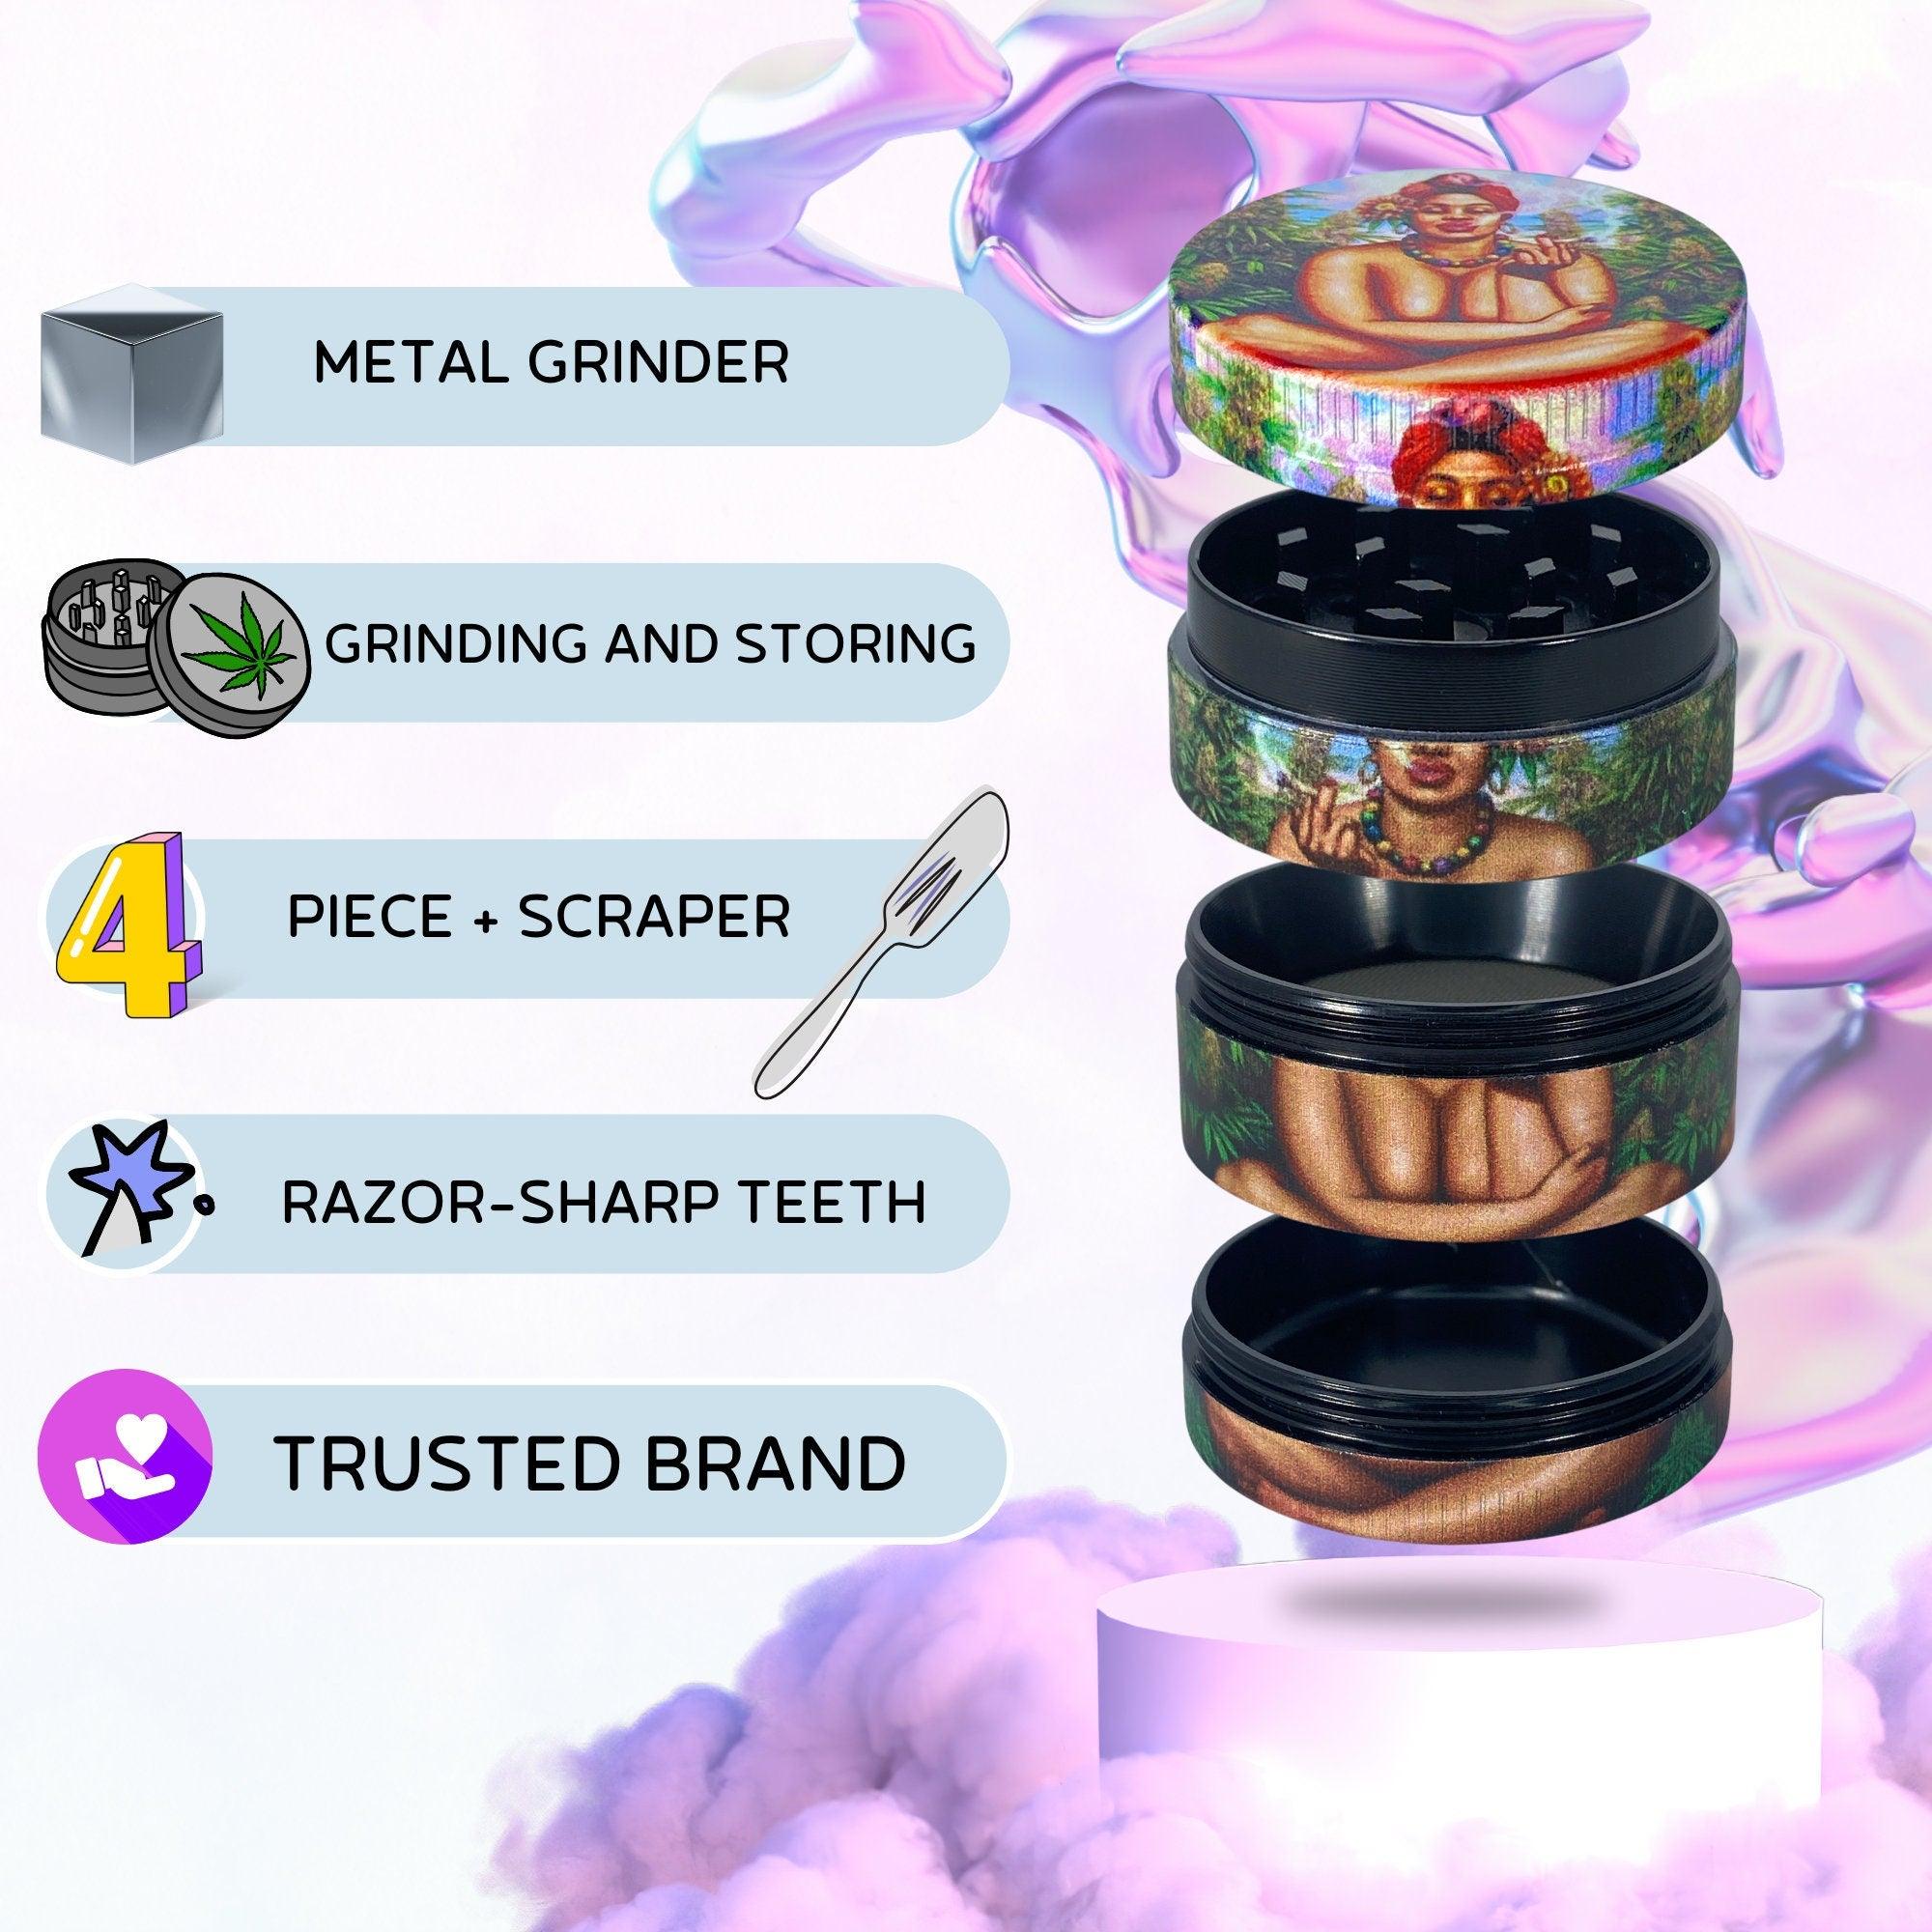 Weed Grinder | African Cool Funny, Men marijuana, cannabis grinders, accessories, 4 piece,fine cannabis, Frida Kahlo, Trippy Herb Girly bong